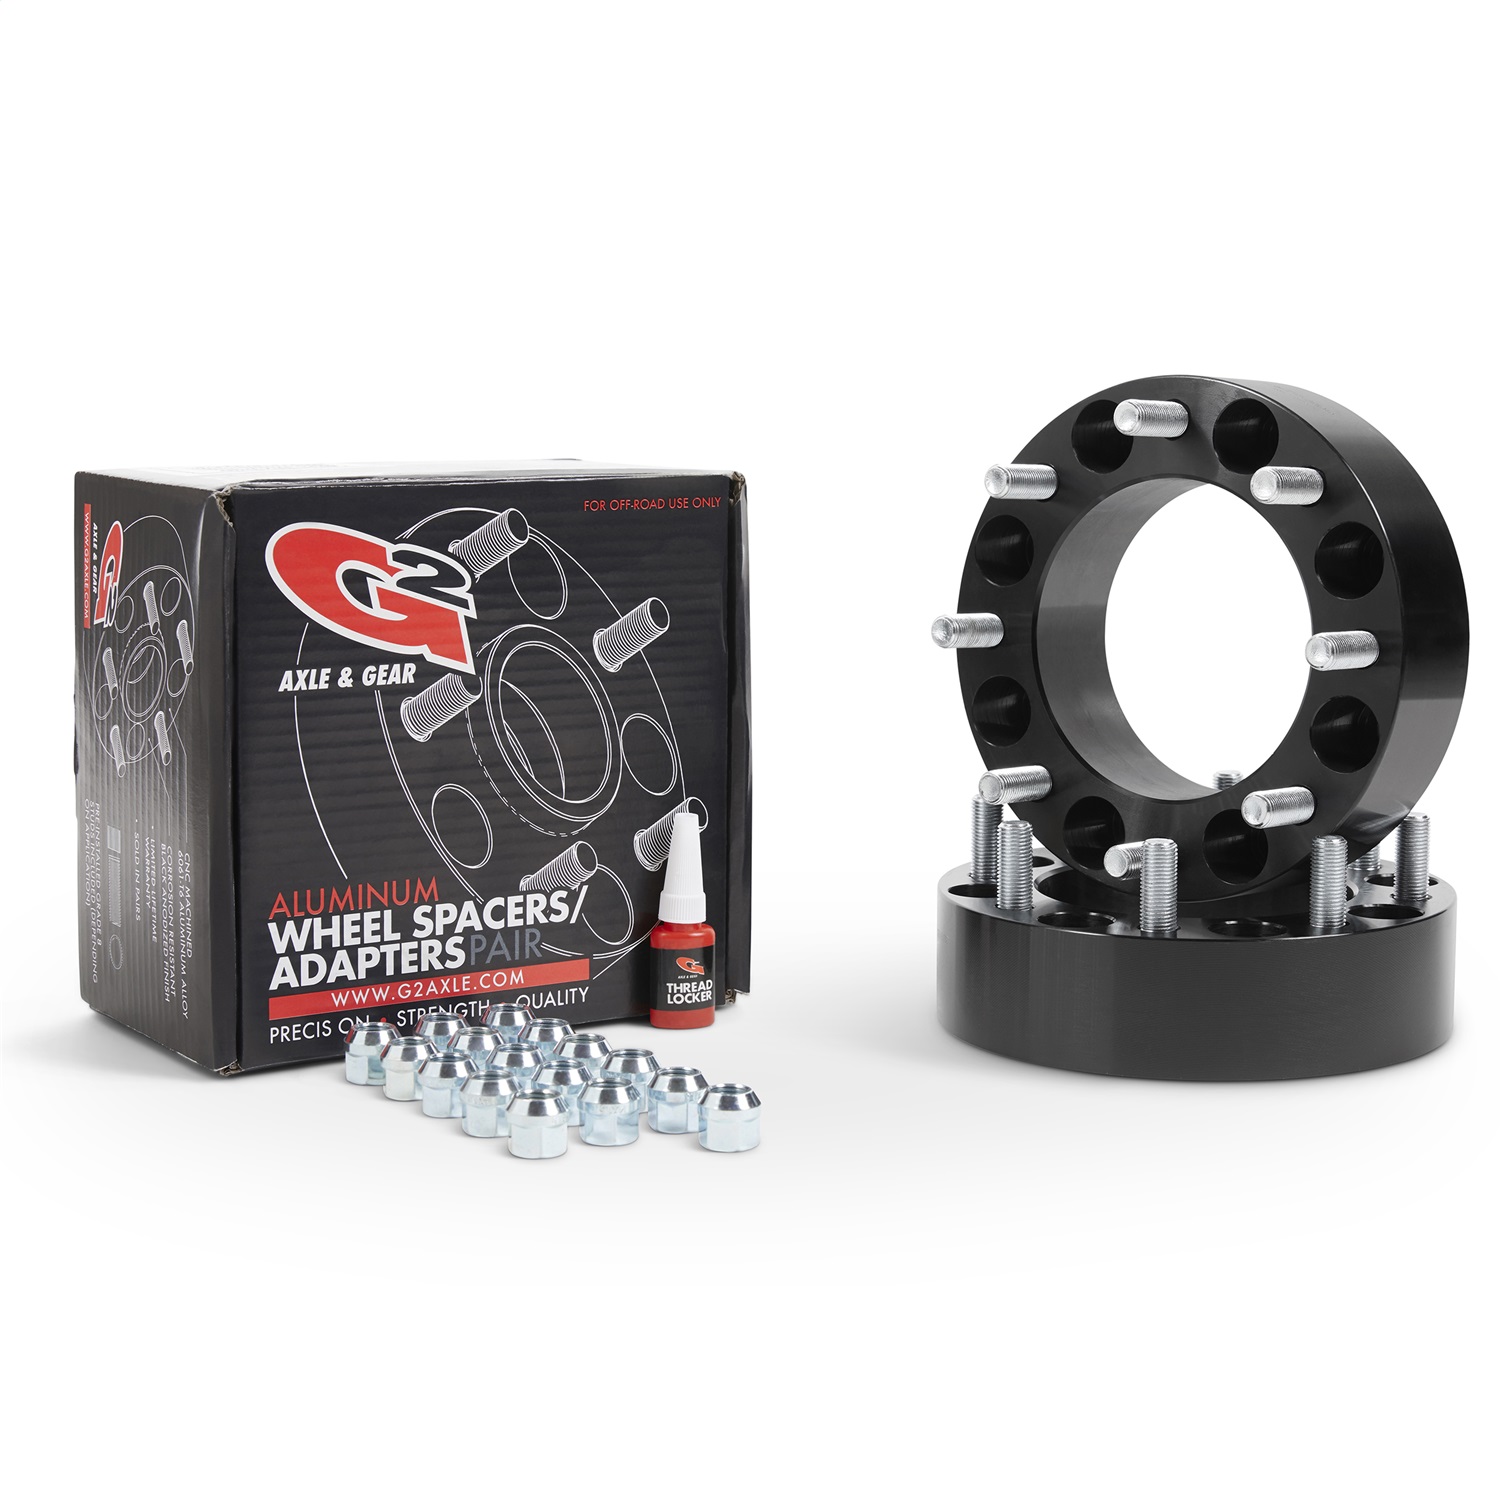 G2 Axle and Gear 93-70-200 Wheel Spacer